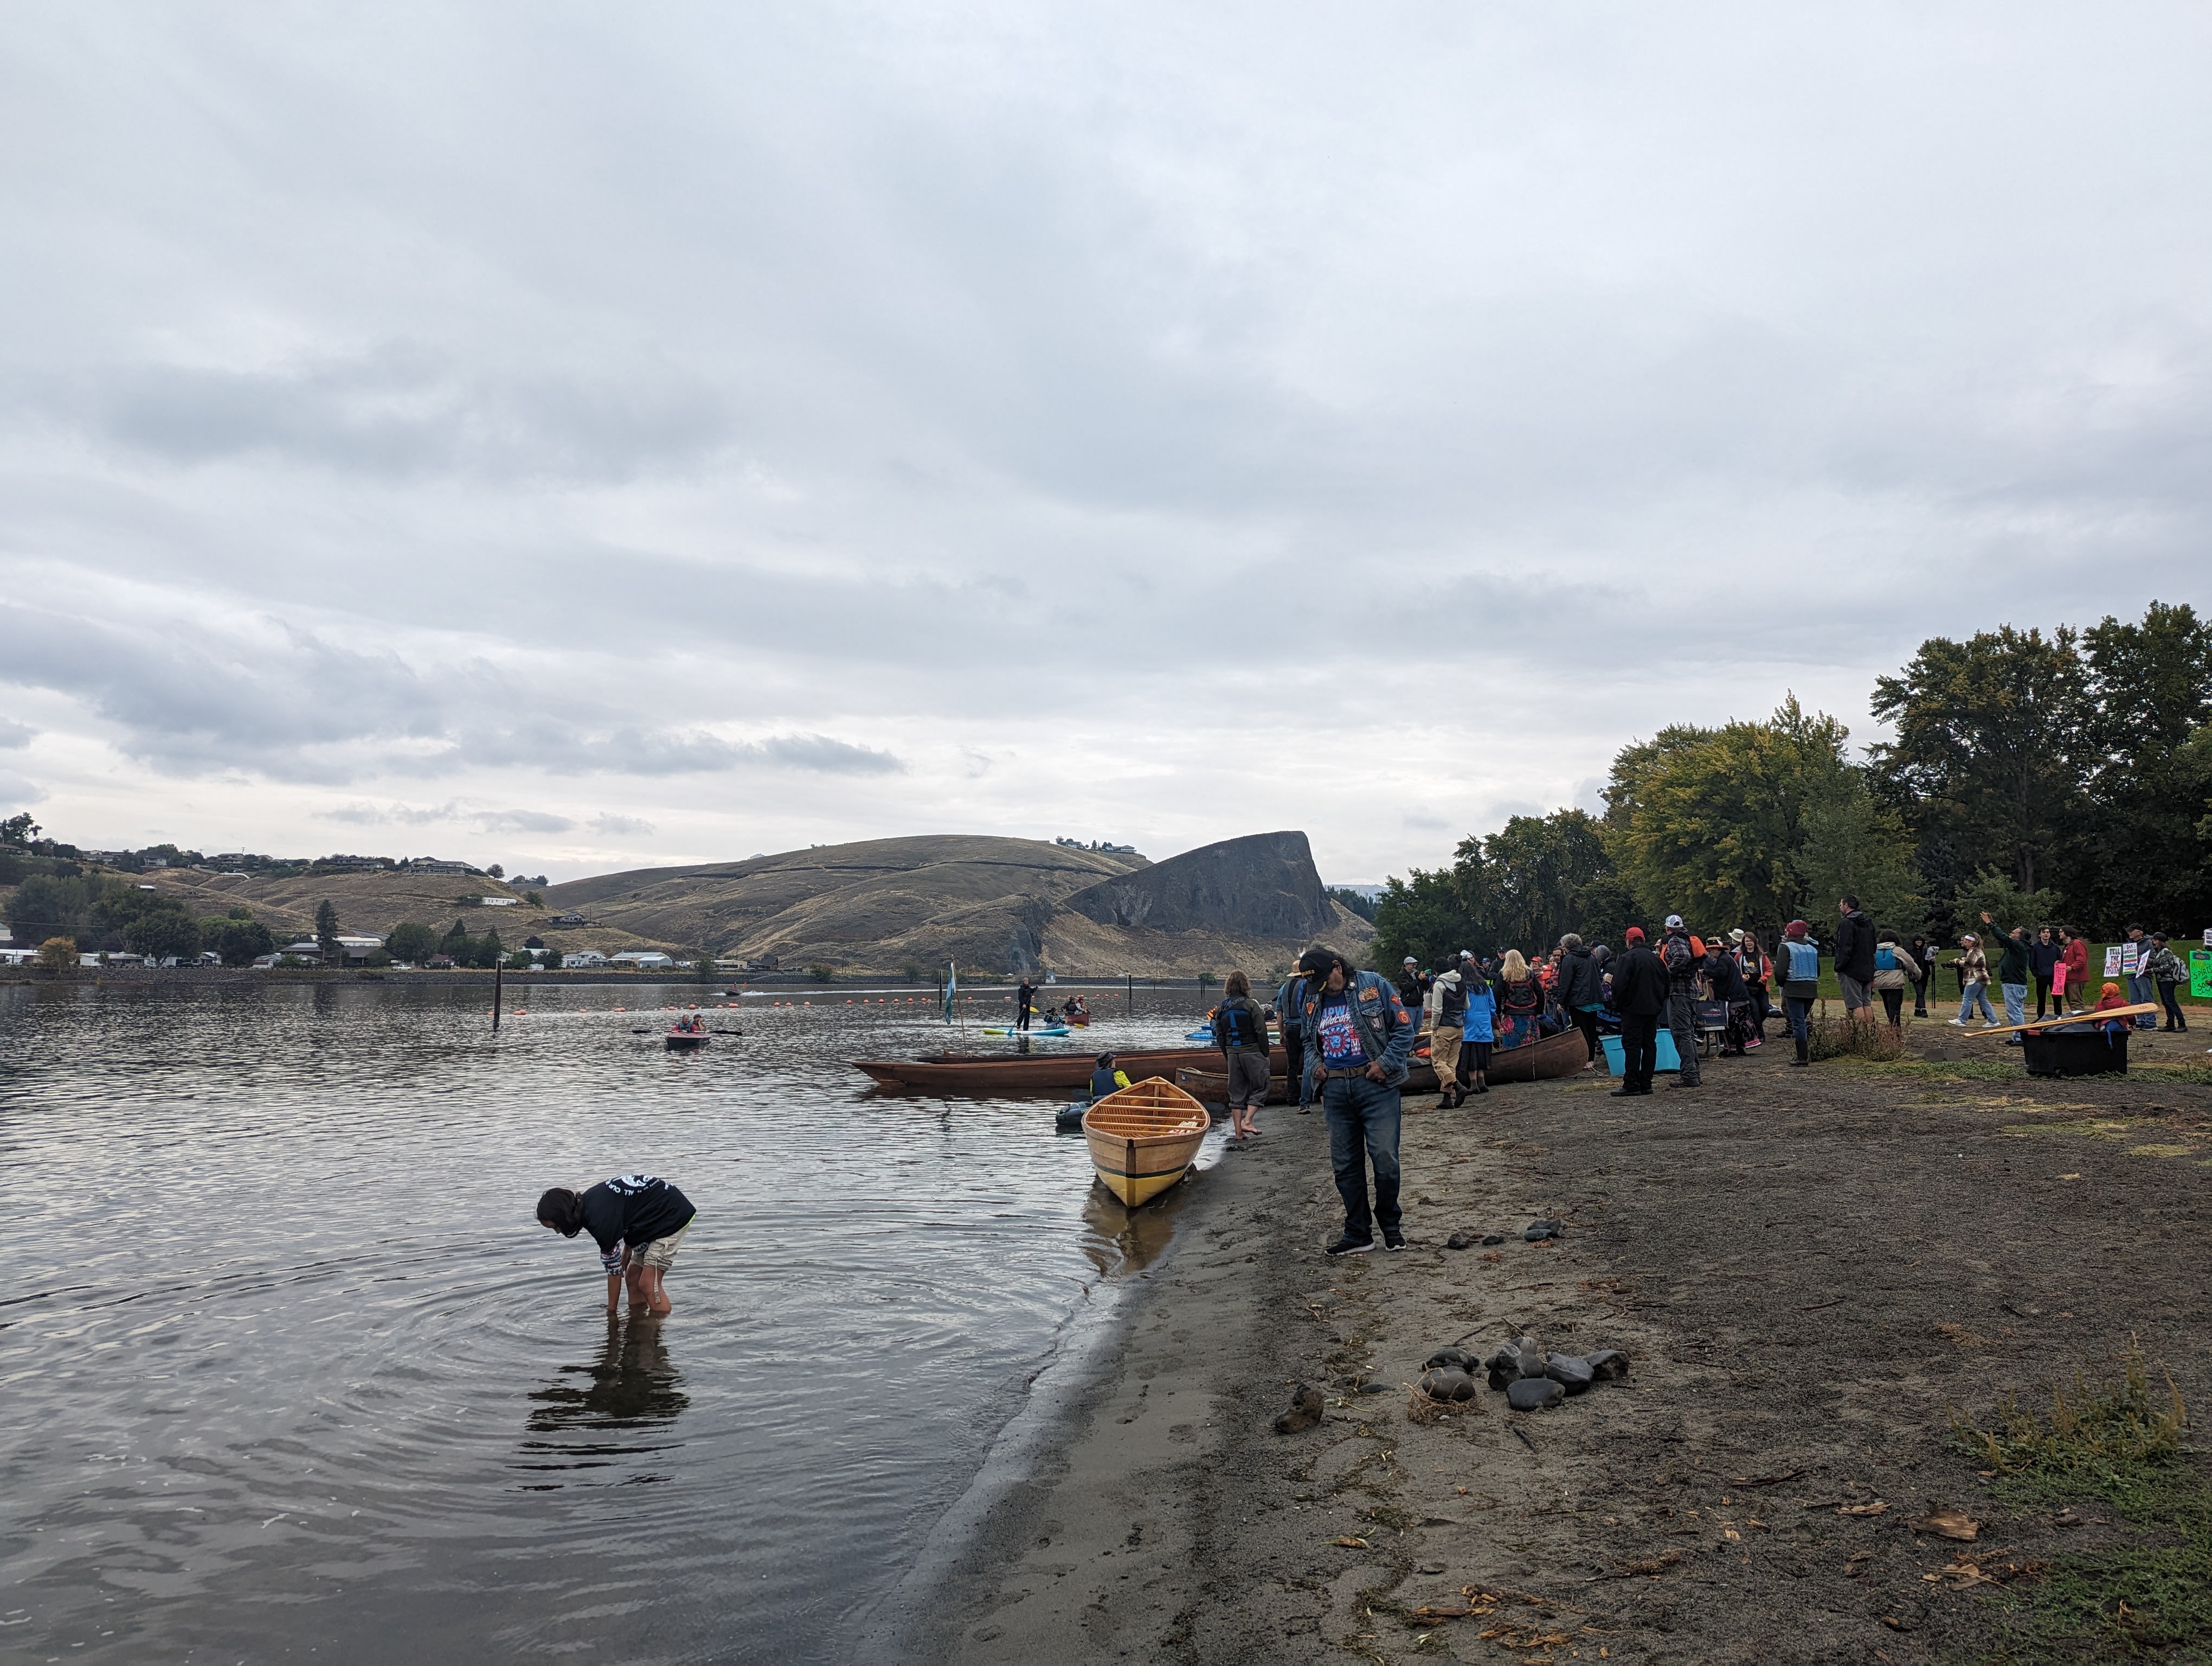 People gather at the shores of the Snake River in Hells Gate State Park outside of Lewiston, Idaho. Desert mountains can be seen in the distance as canoes sit on a sandy shore under clouds.